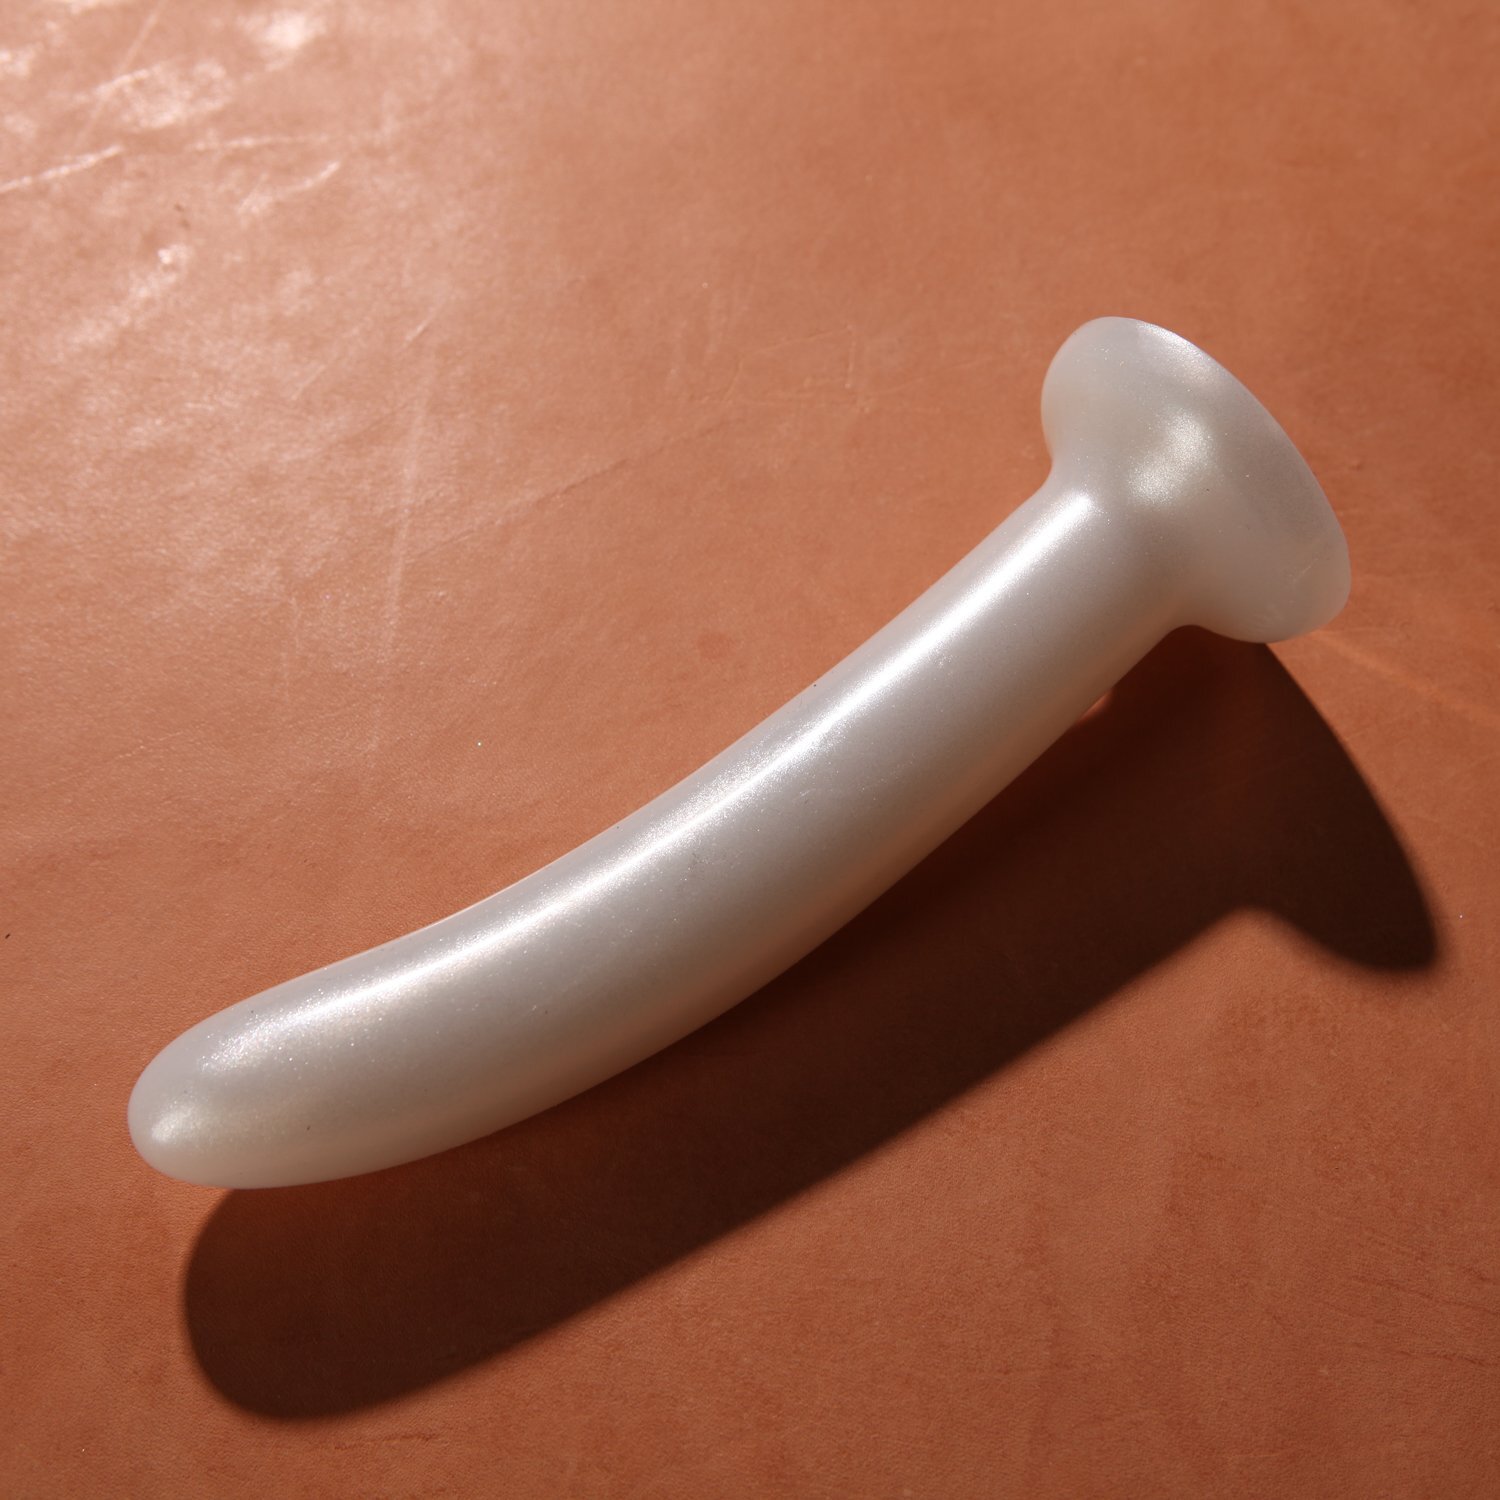 Leisure by Tantus (online store)